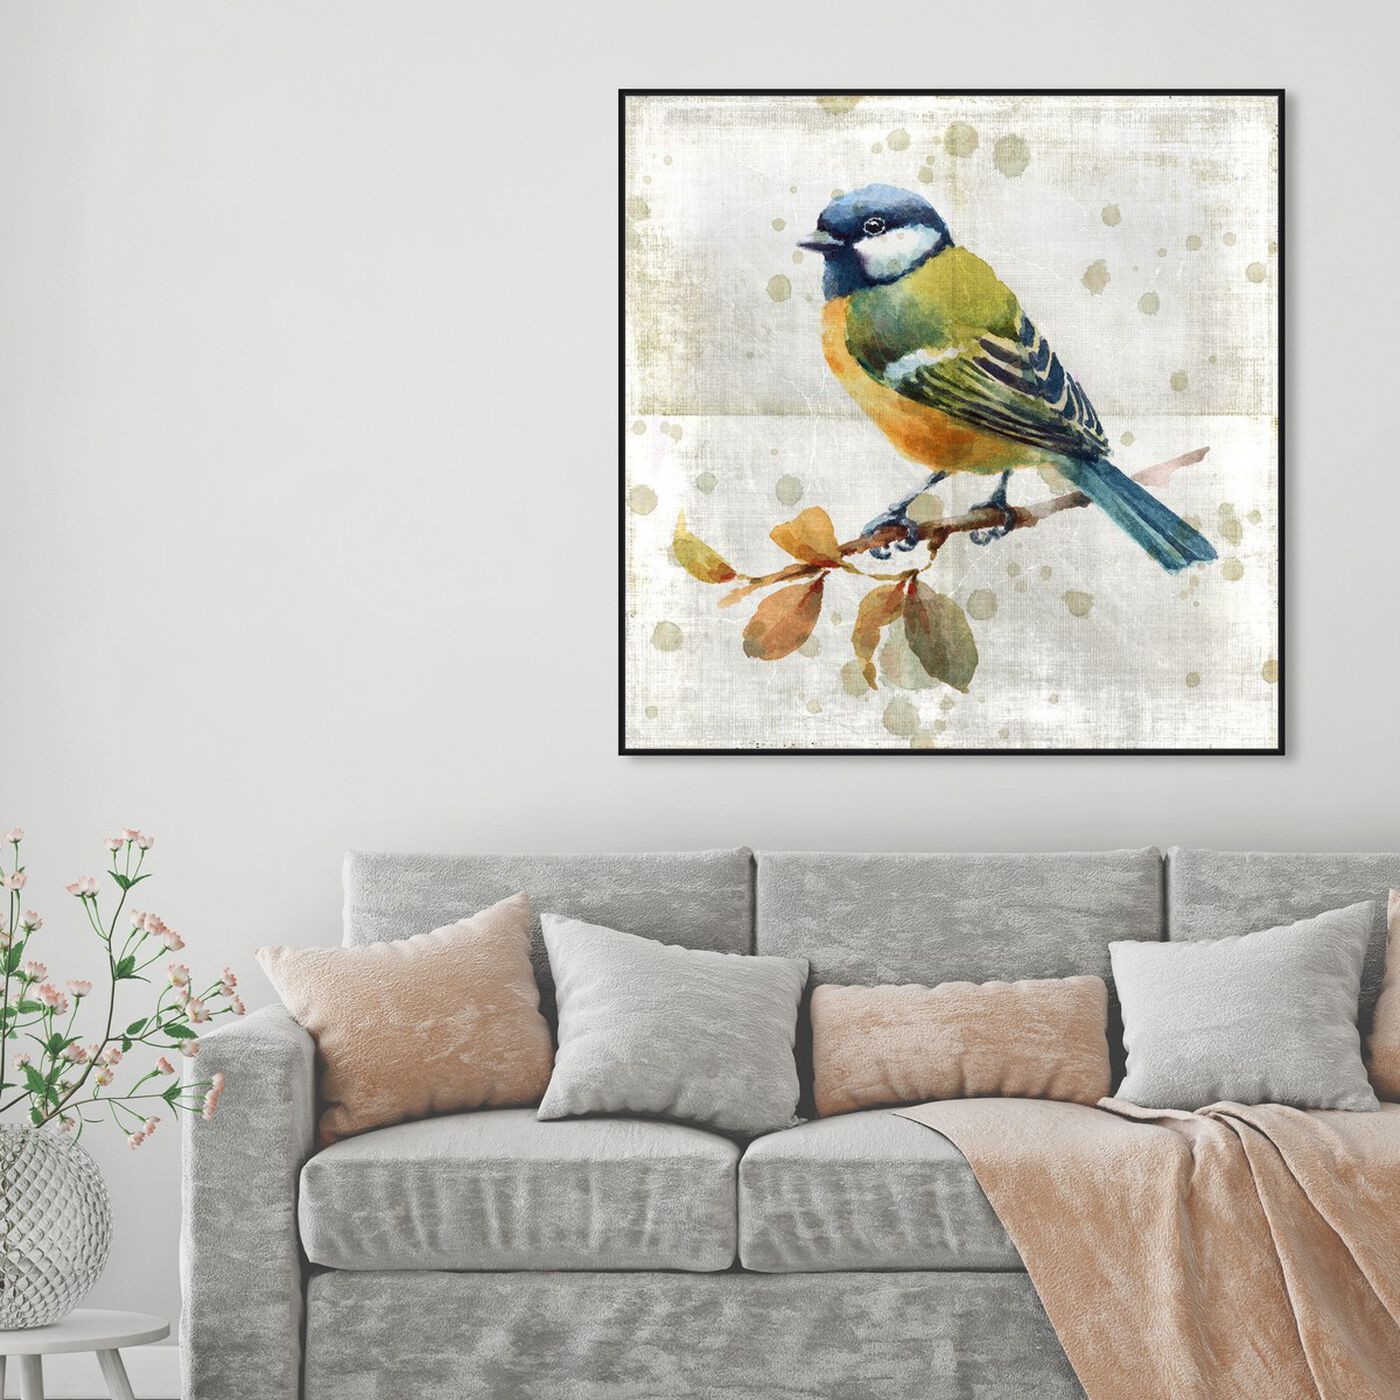 Hanging view of Blue Bird featuring animals and birds art.